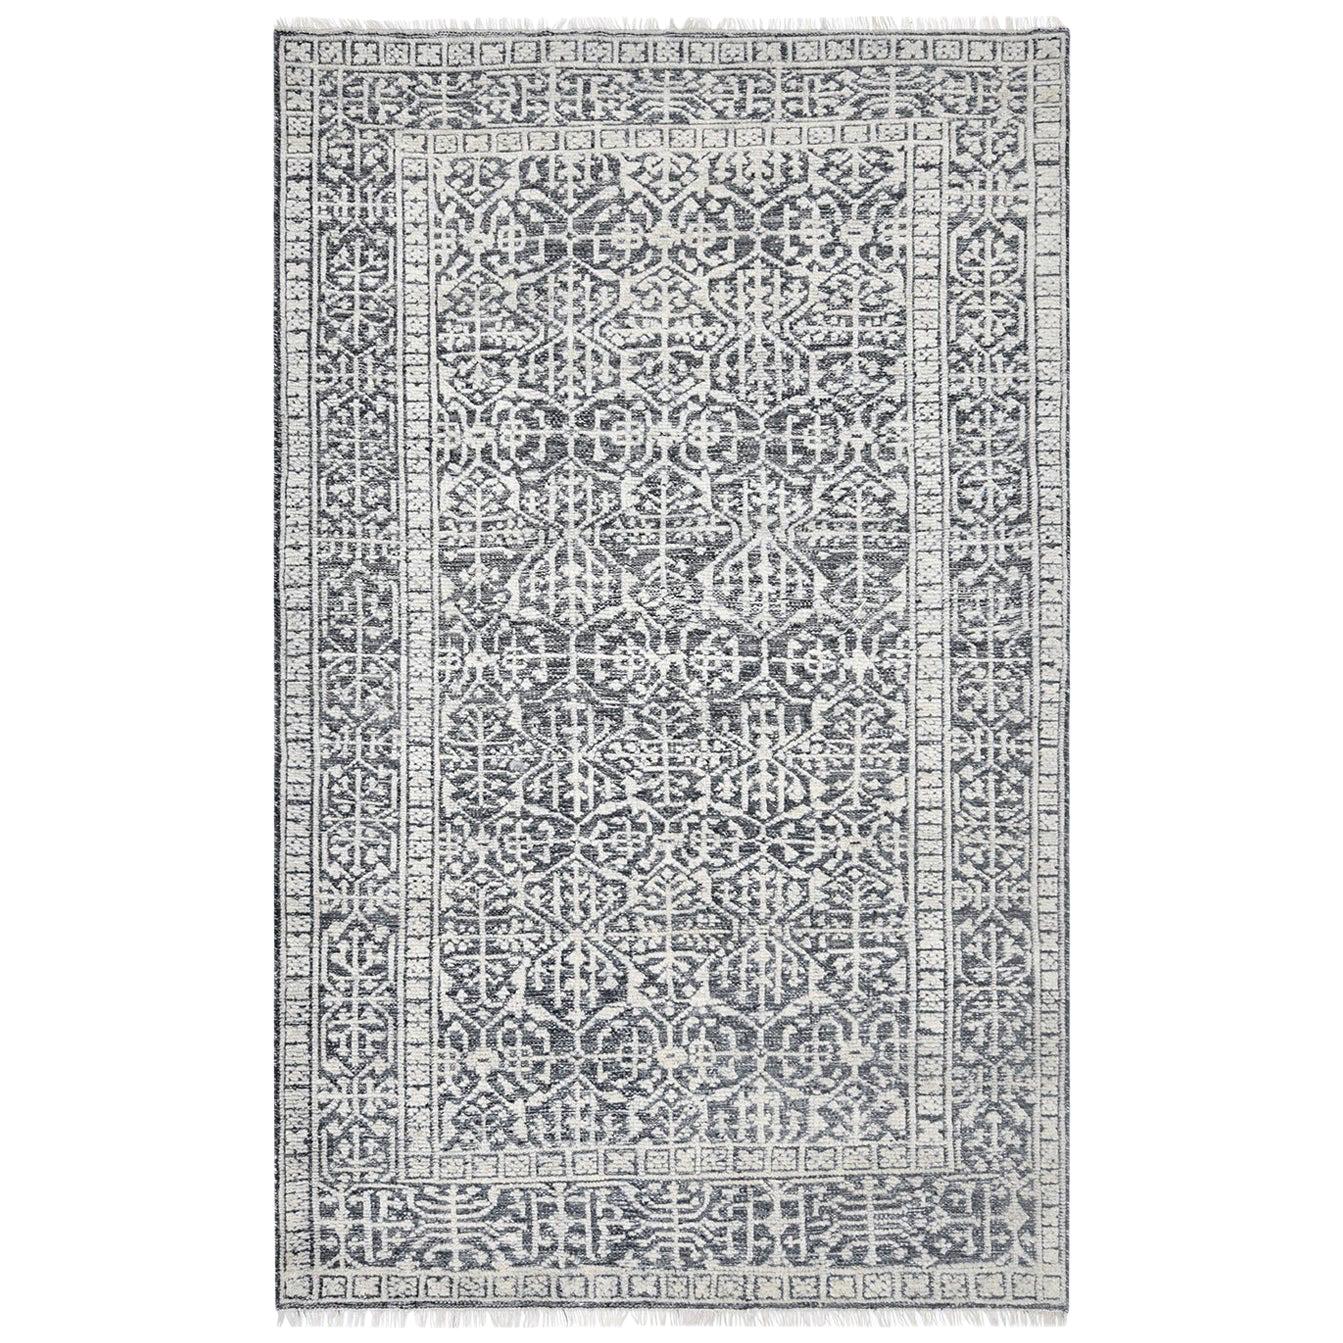 Indian Made Hand-Knotted Contemporary Transitional Area Rug